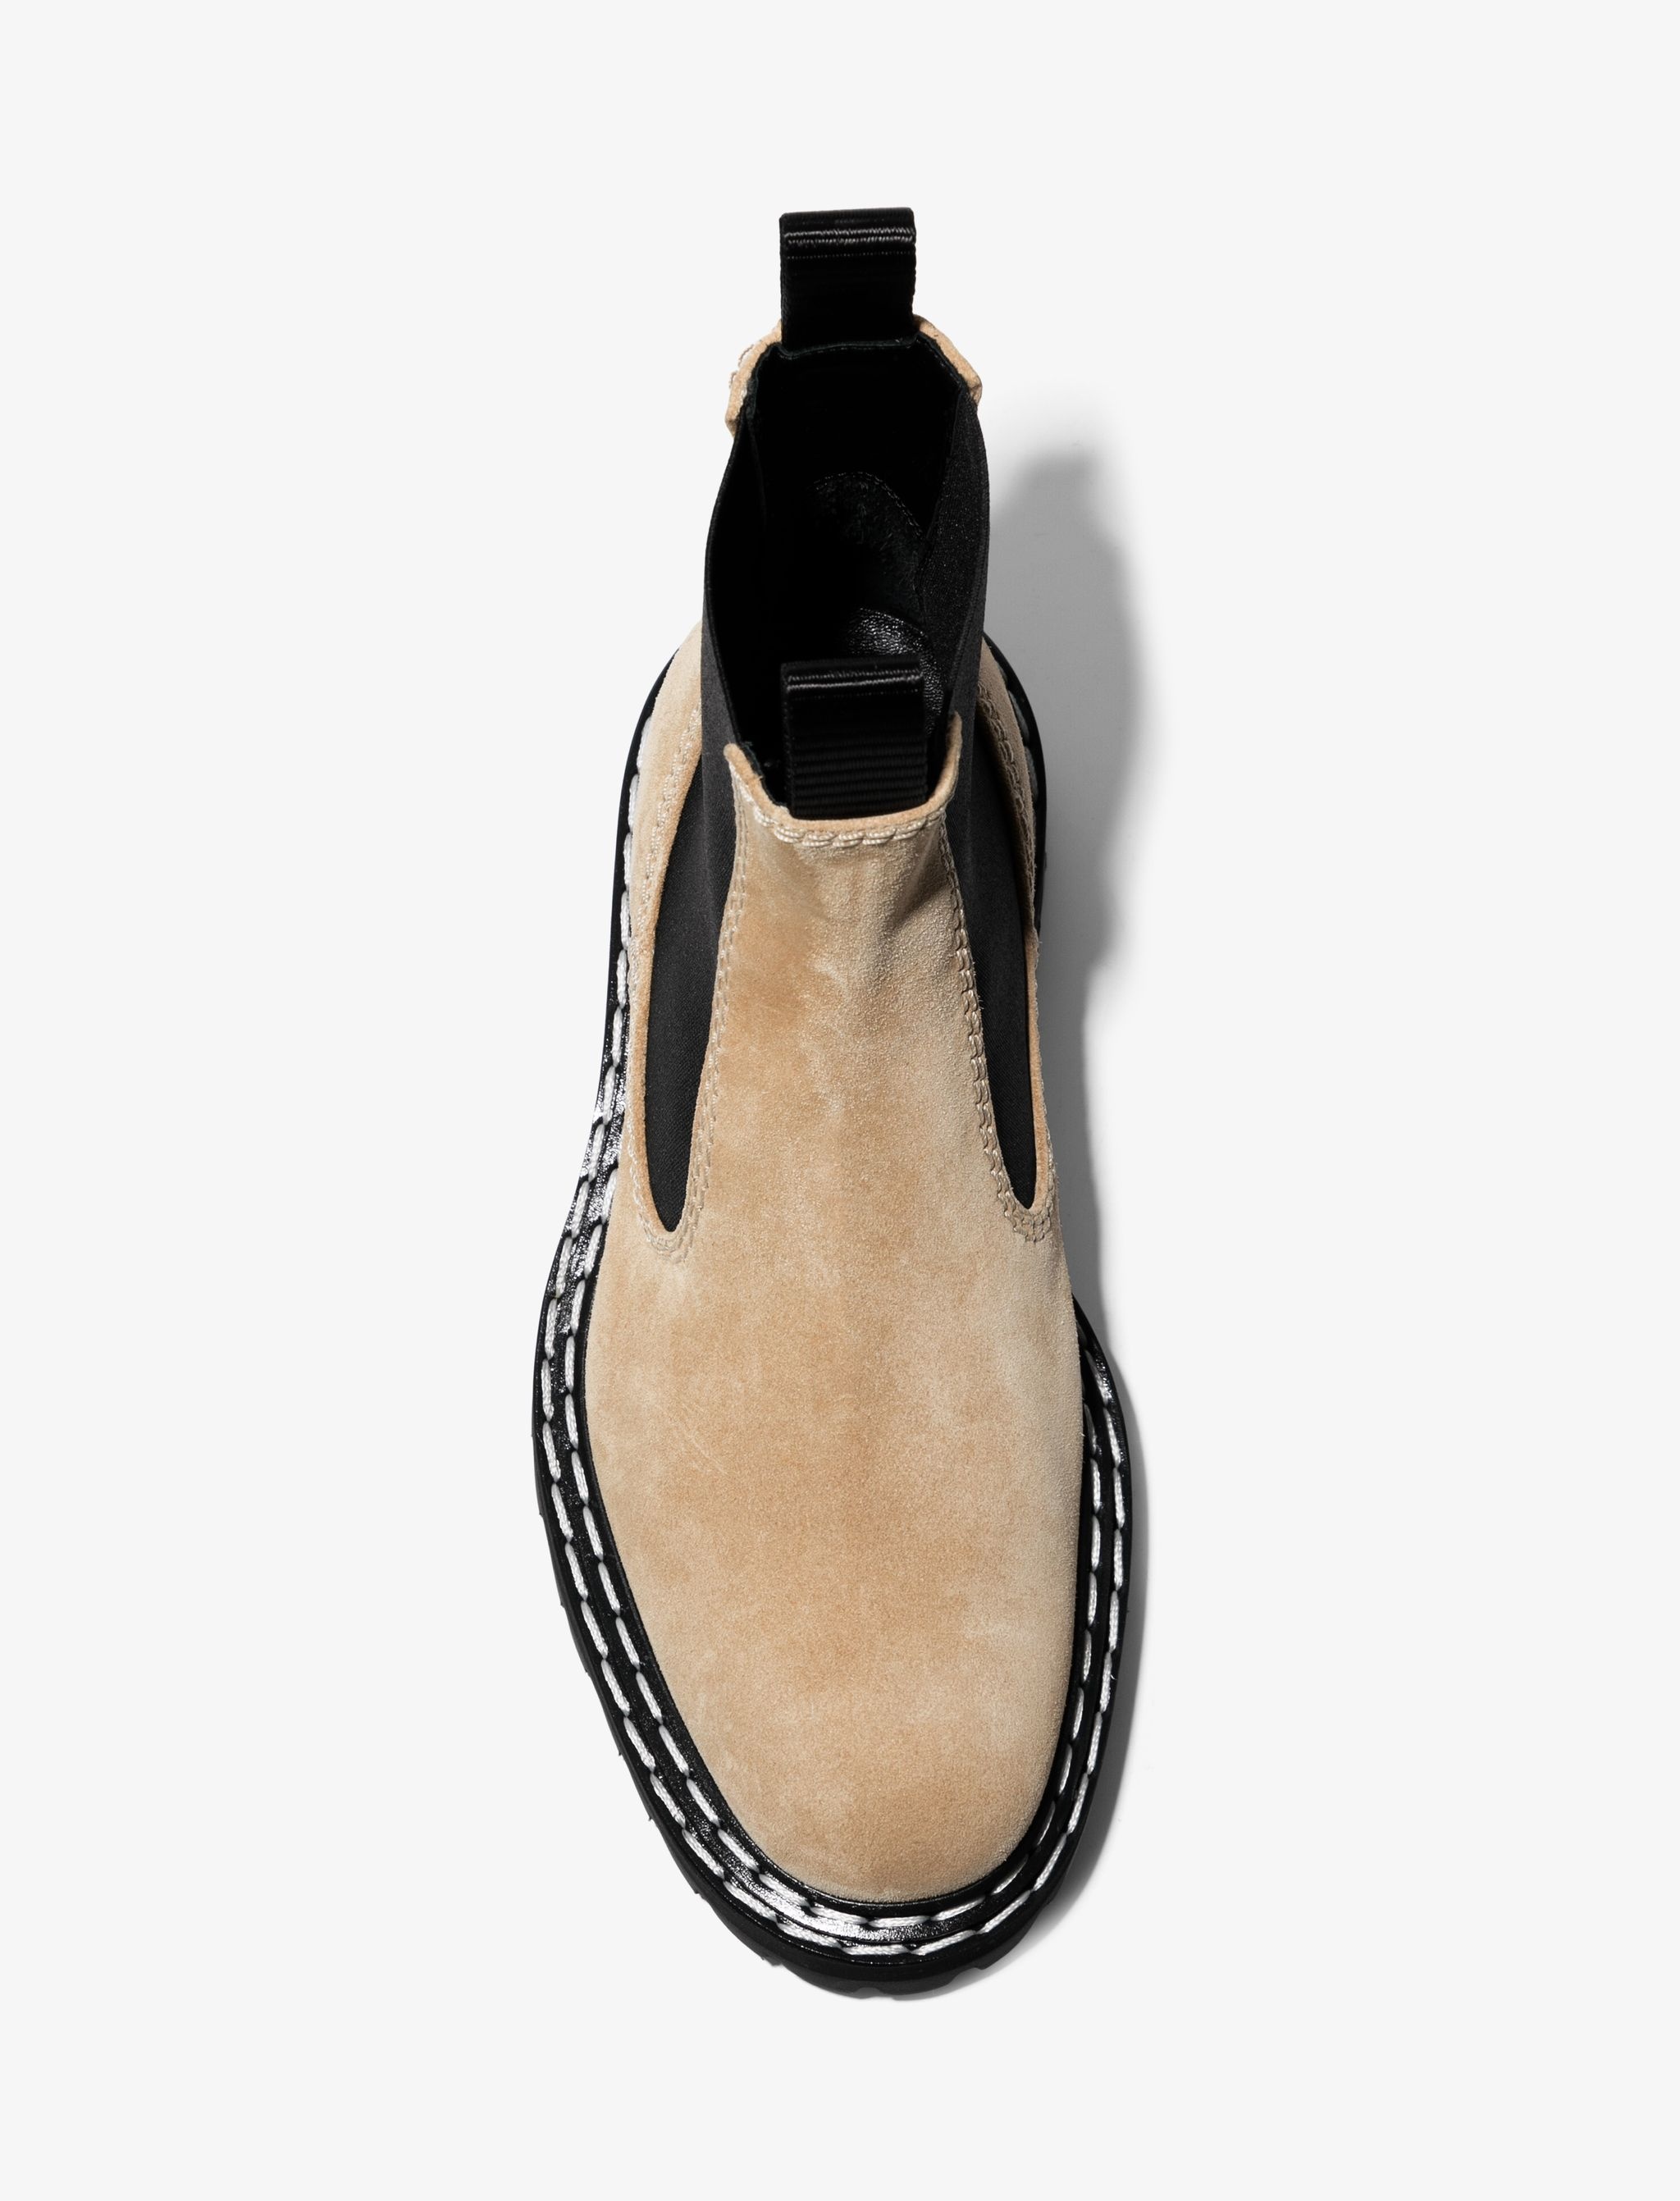 Suede Lug Sole Chelsea Boots - 4